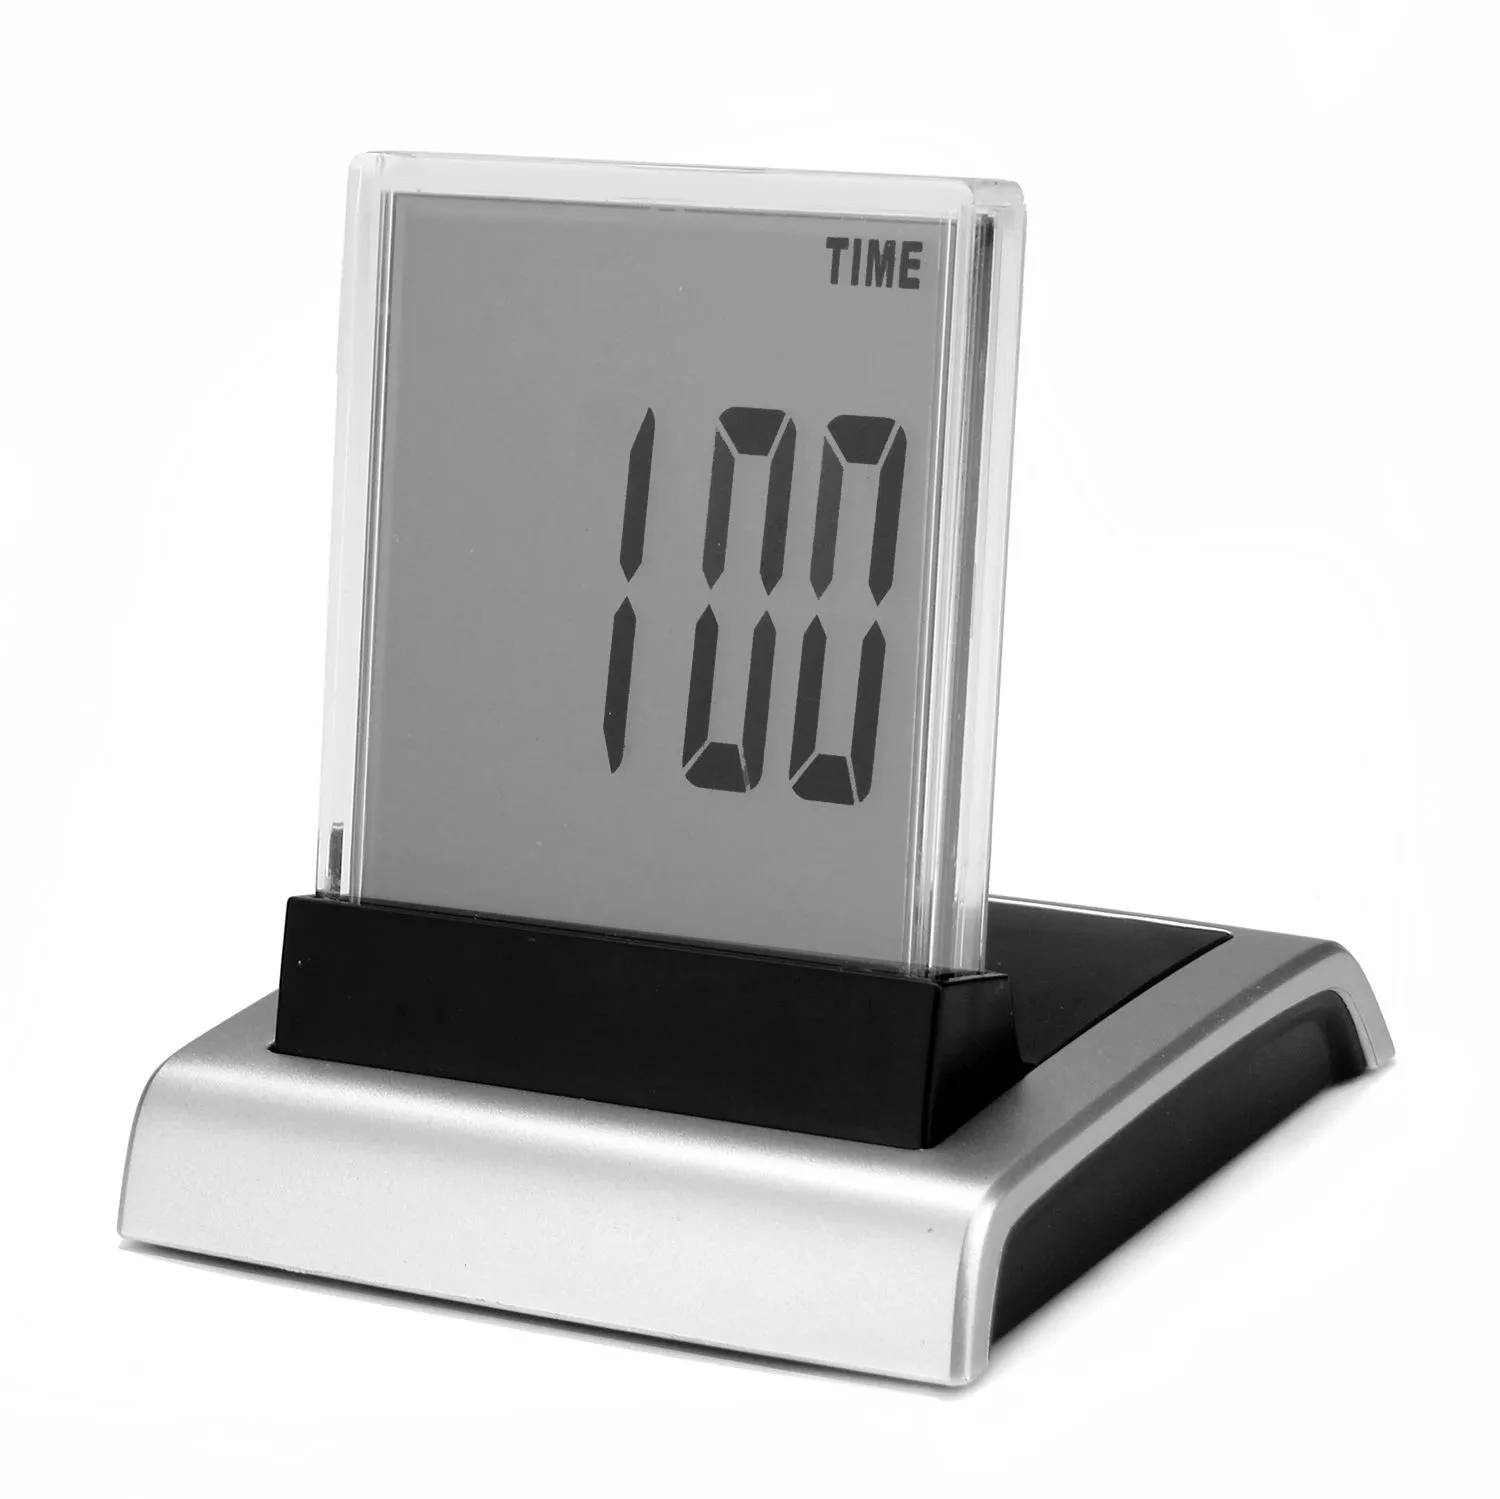 7-Color Change LED Digital LCD Alarm Clock Thermometer